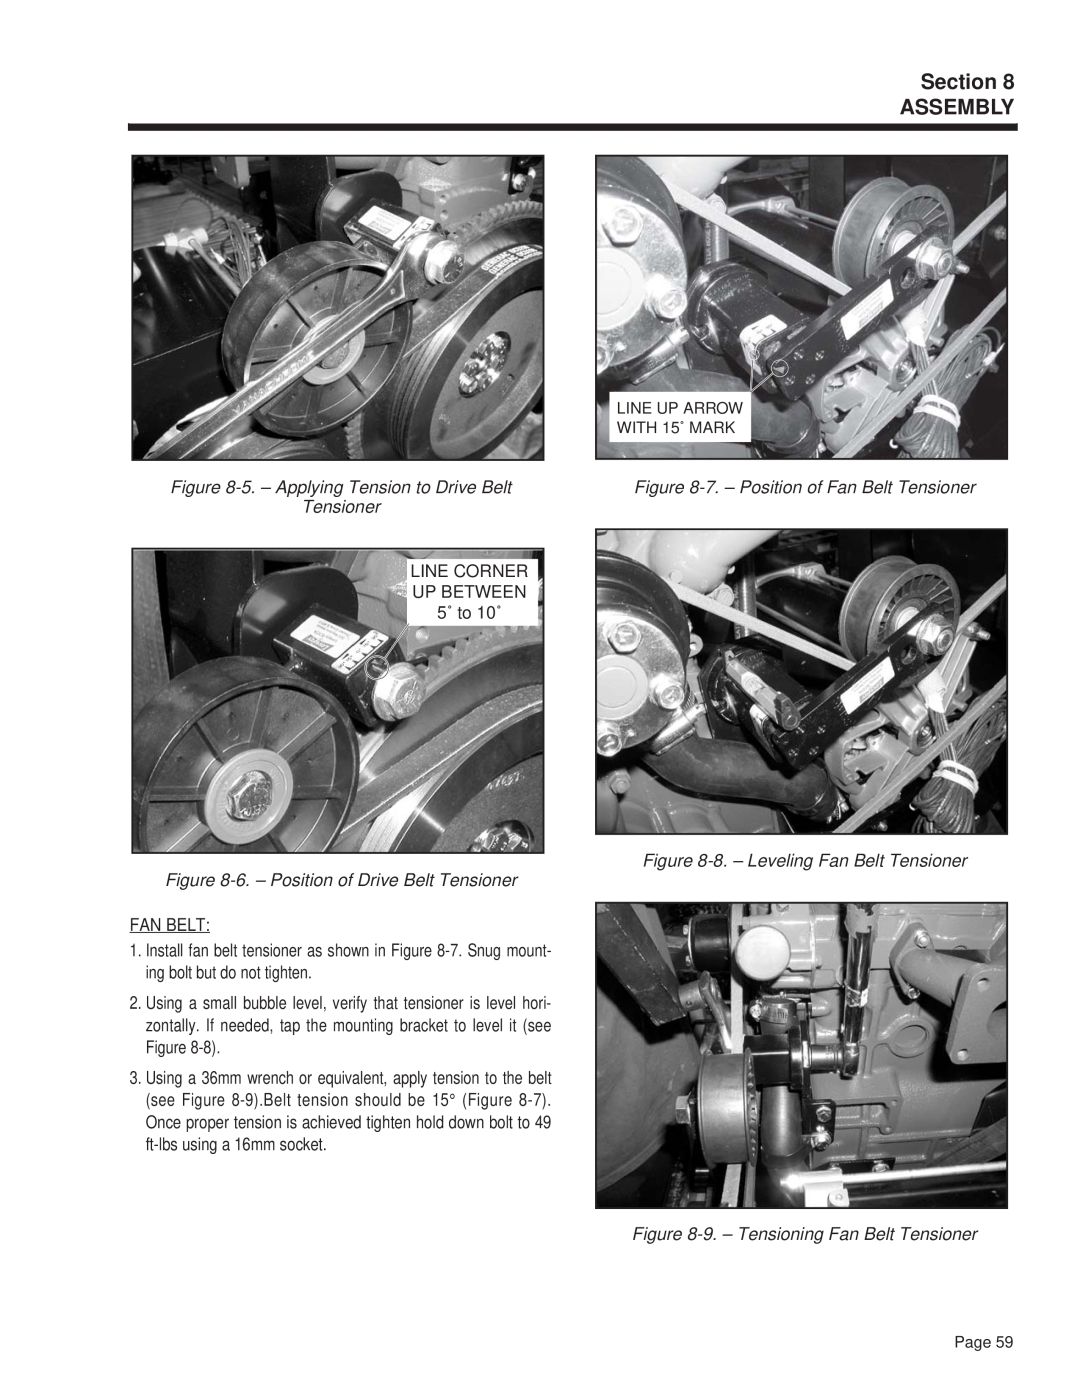 Guardian Technologies 4270 manual 5. - Applying Tension to Drive Belt Tensioner, 6. - Position of Drive Belt Tensioner 